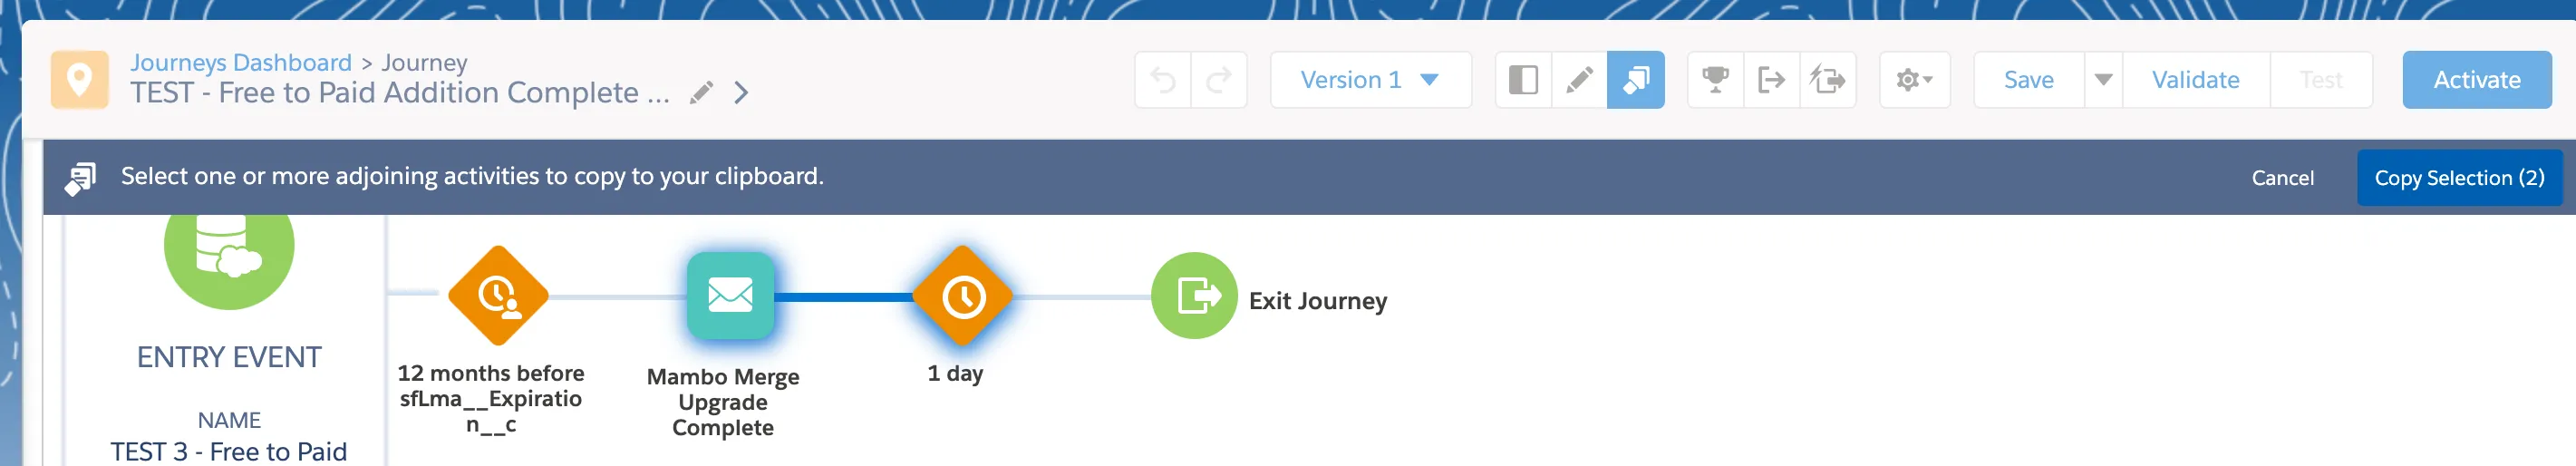 The Interface to Select Activities Within a Journey Track to Copy. To Finalize, Select the “Copy Selection” Button on the Upper Right-Hand Side of the Screen.